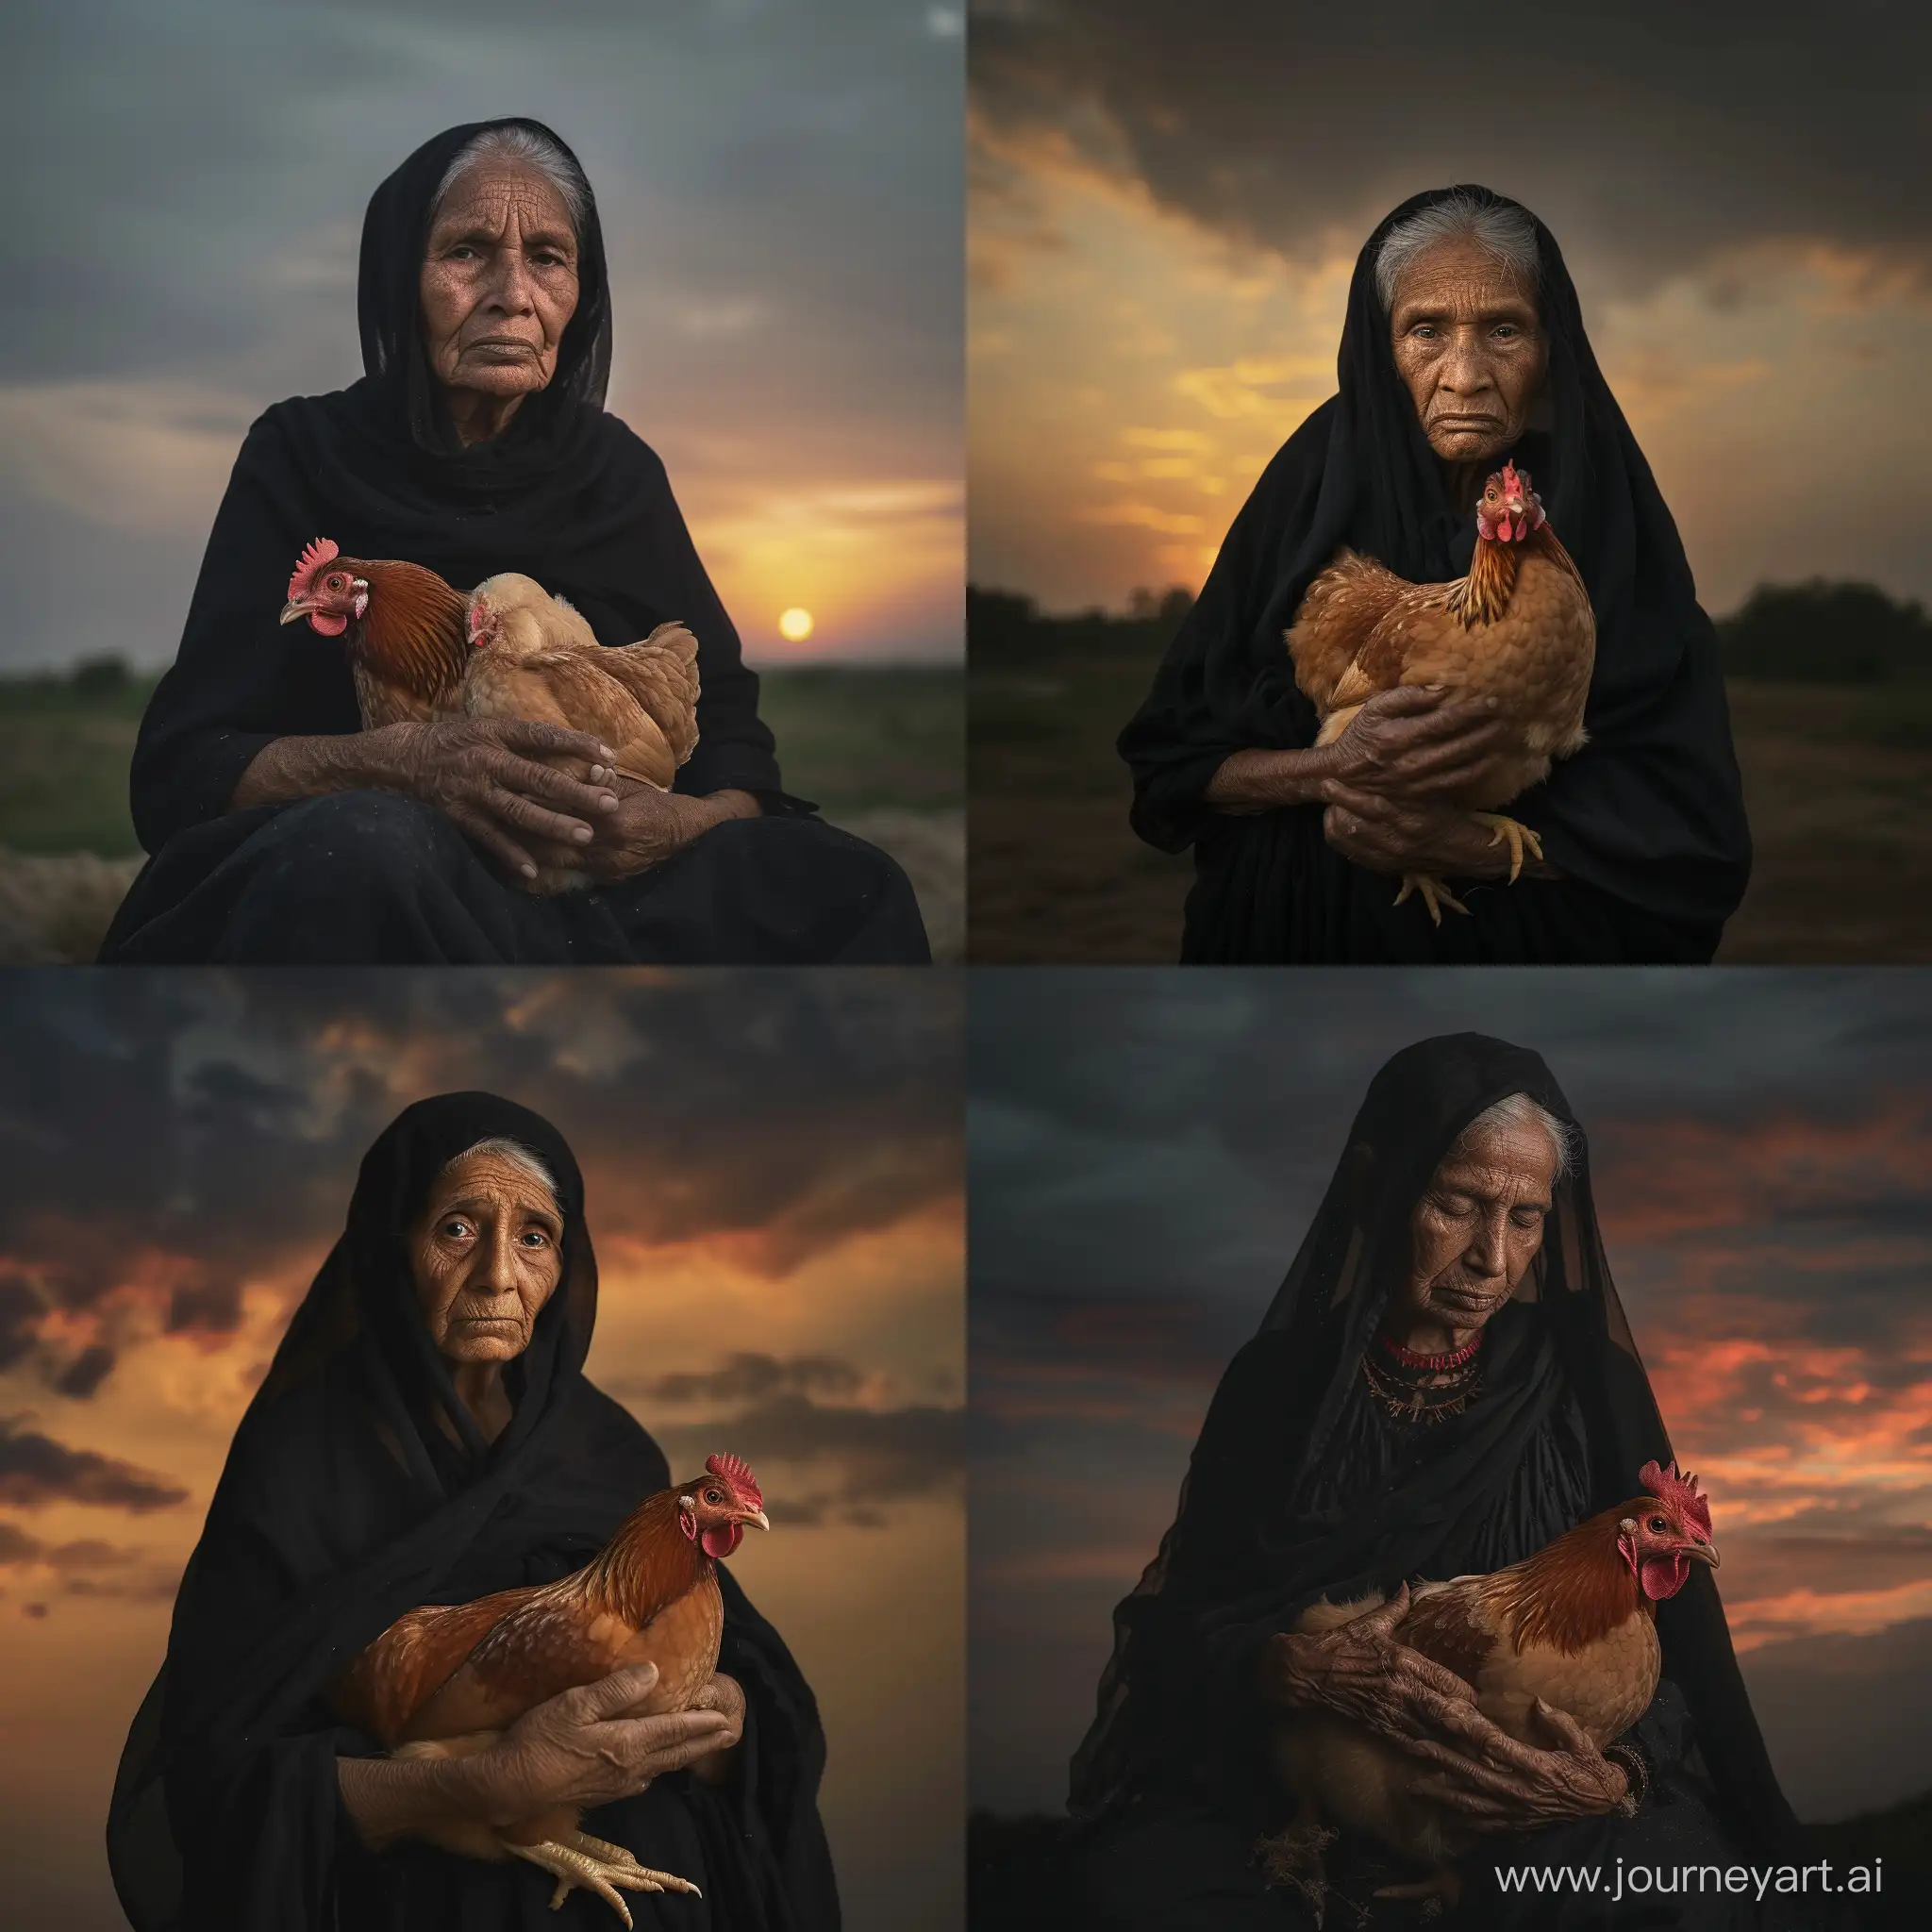 A 90 years india thin old women in black cloting is holding to chickens half body soft ligt en contrast onscharp background  and sunset sky fotorealistisch 59mm fuji xt4  